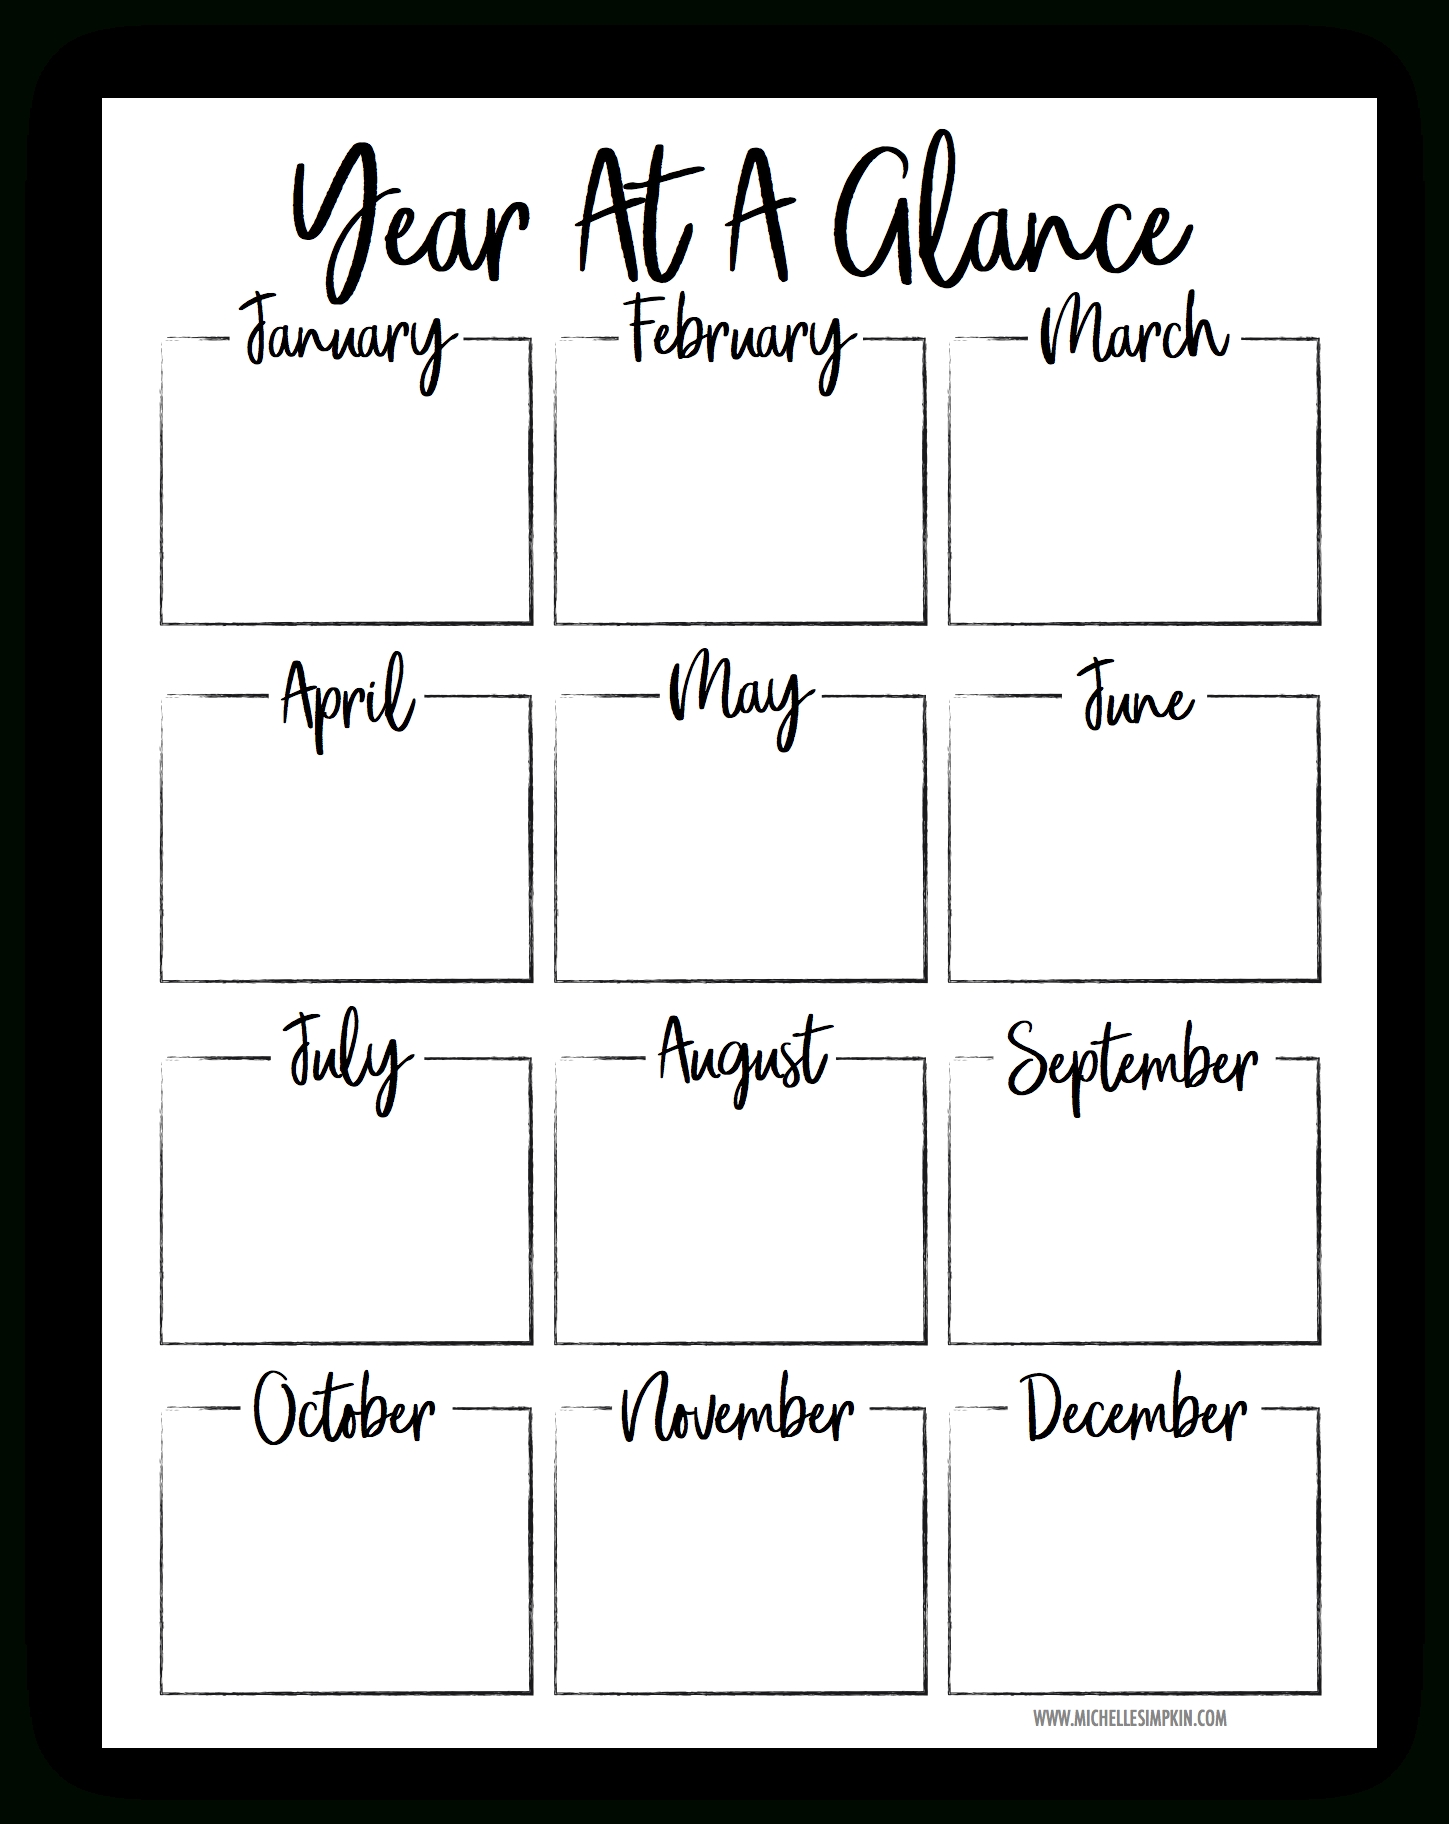 year-at-a-glance-printable-template-riset